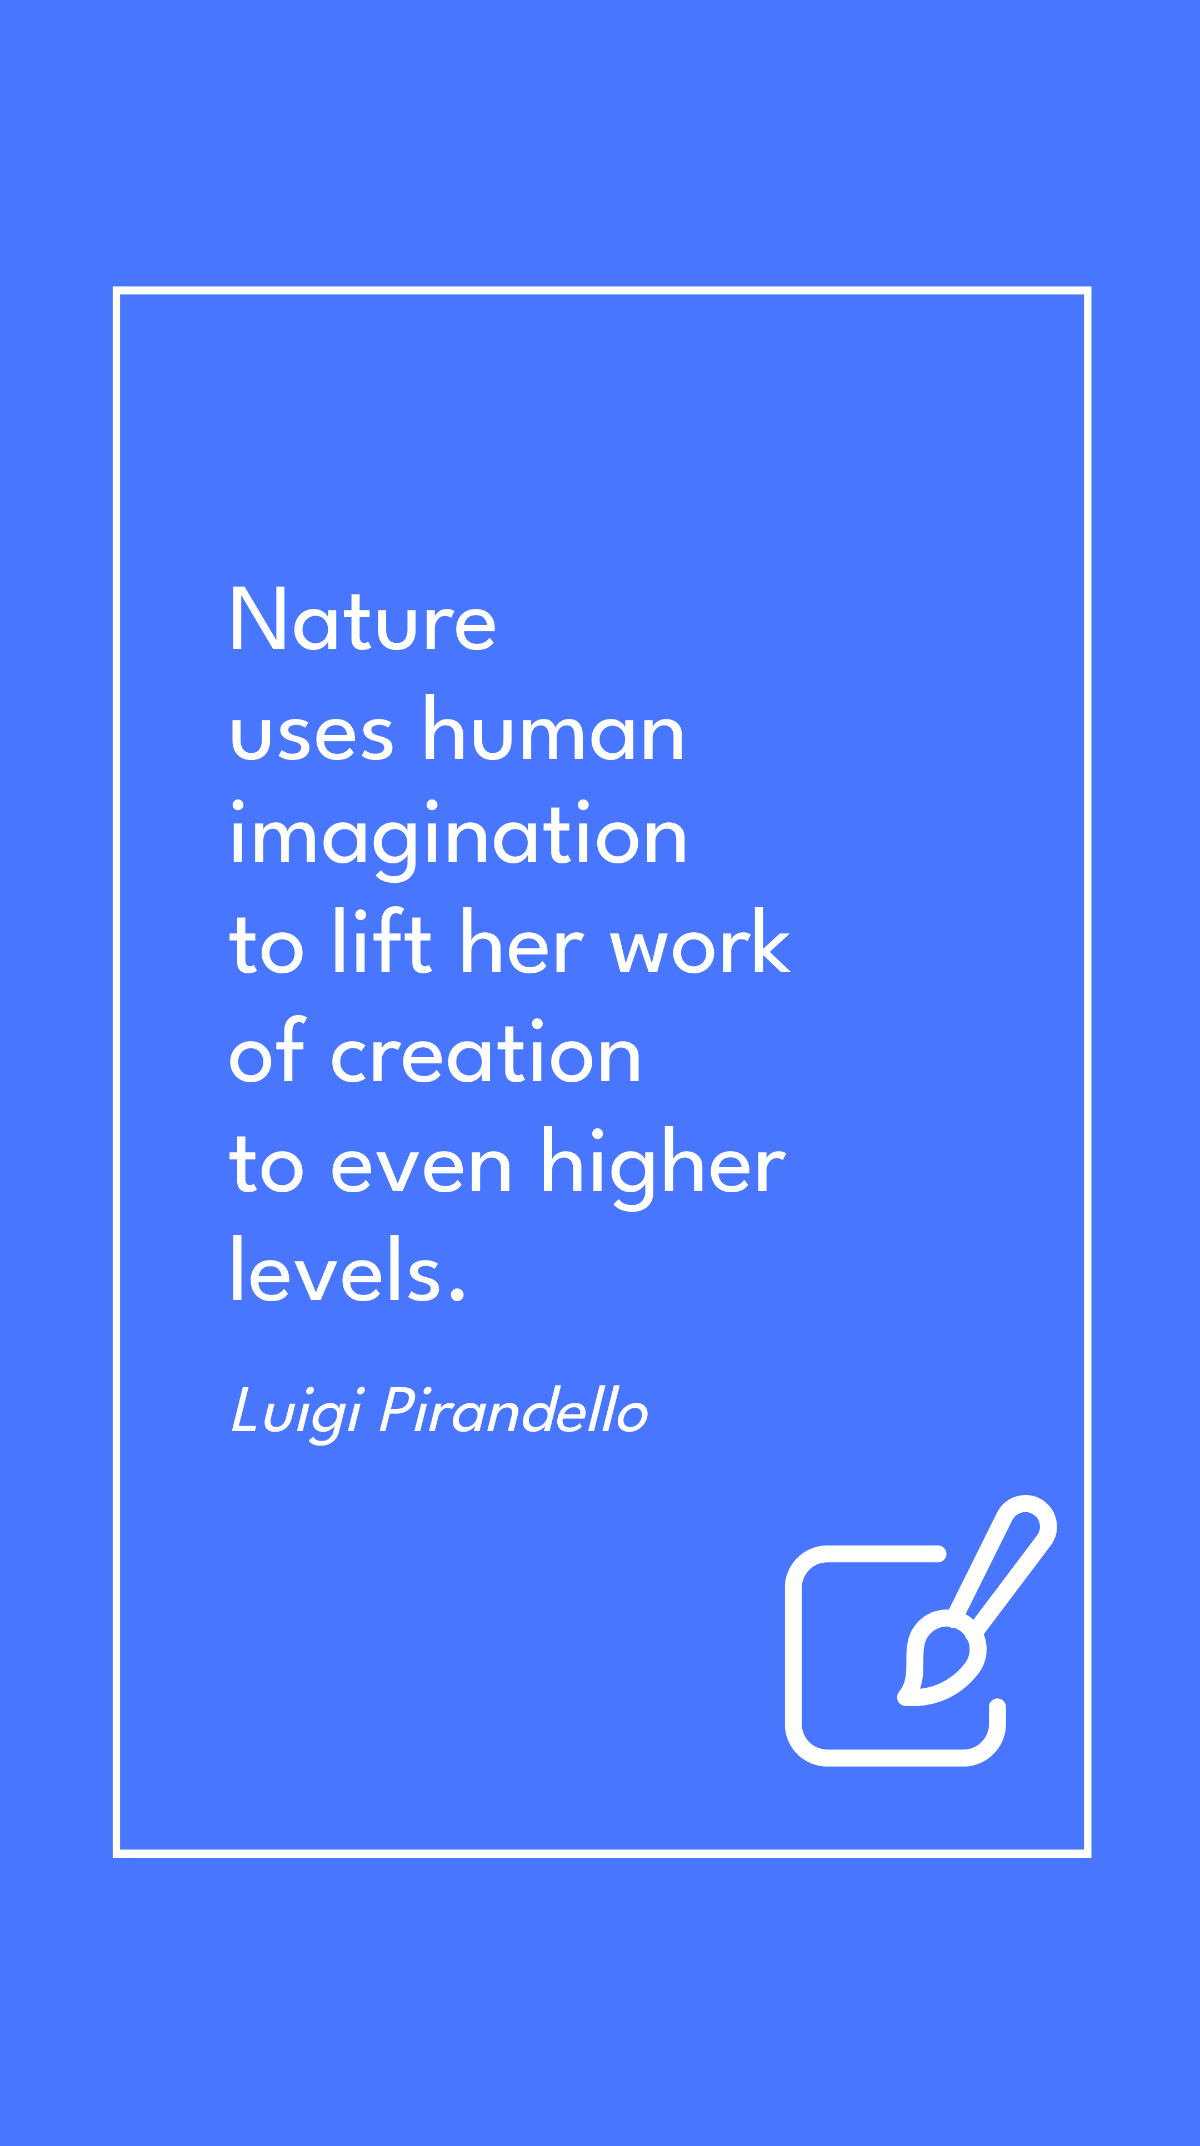 Free Luigi Pirandello - Nature uses human imagination to lift her work of creation to even higher levels. Template